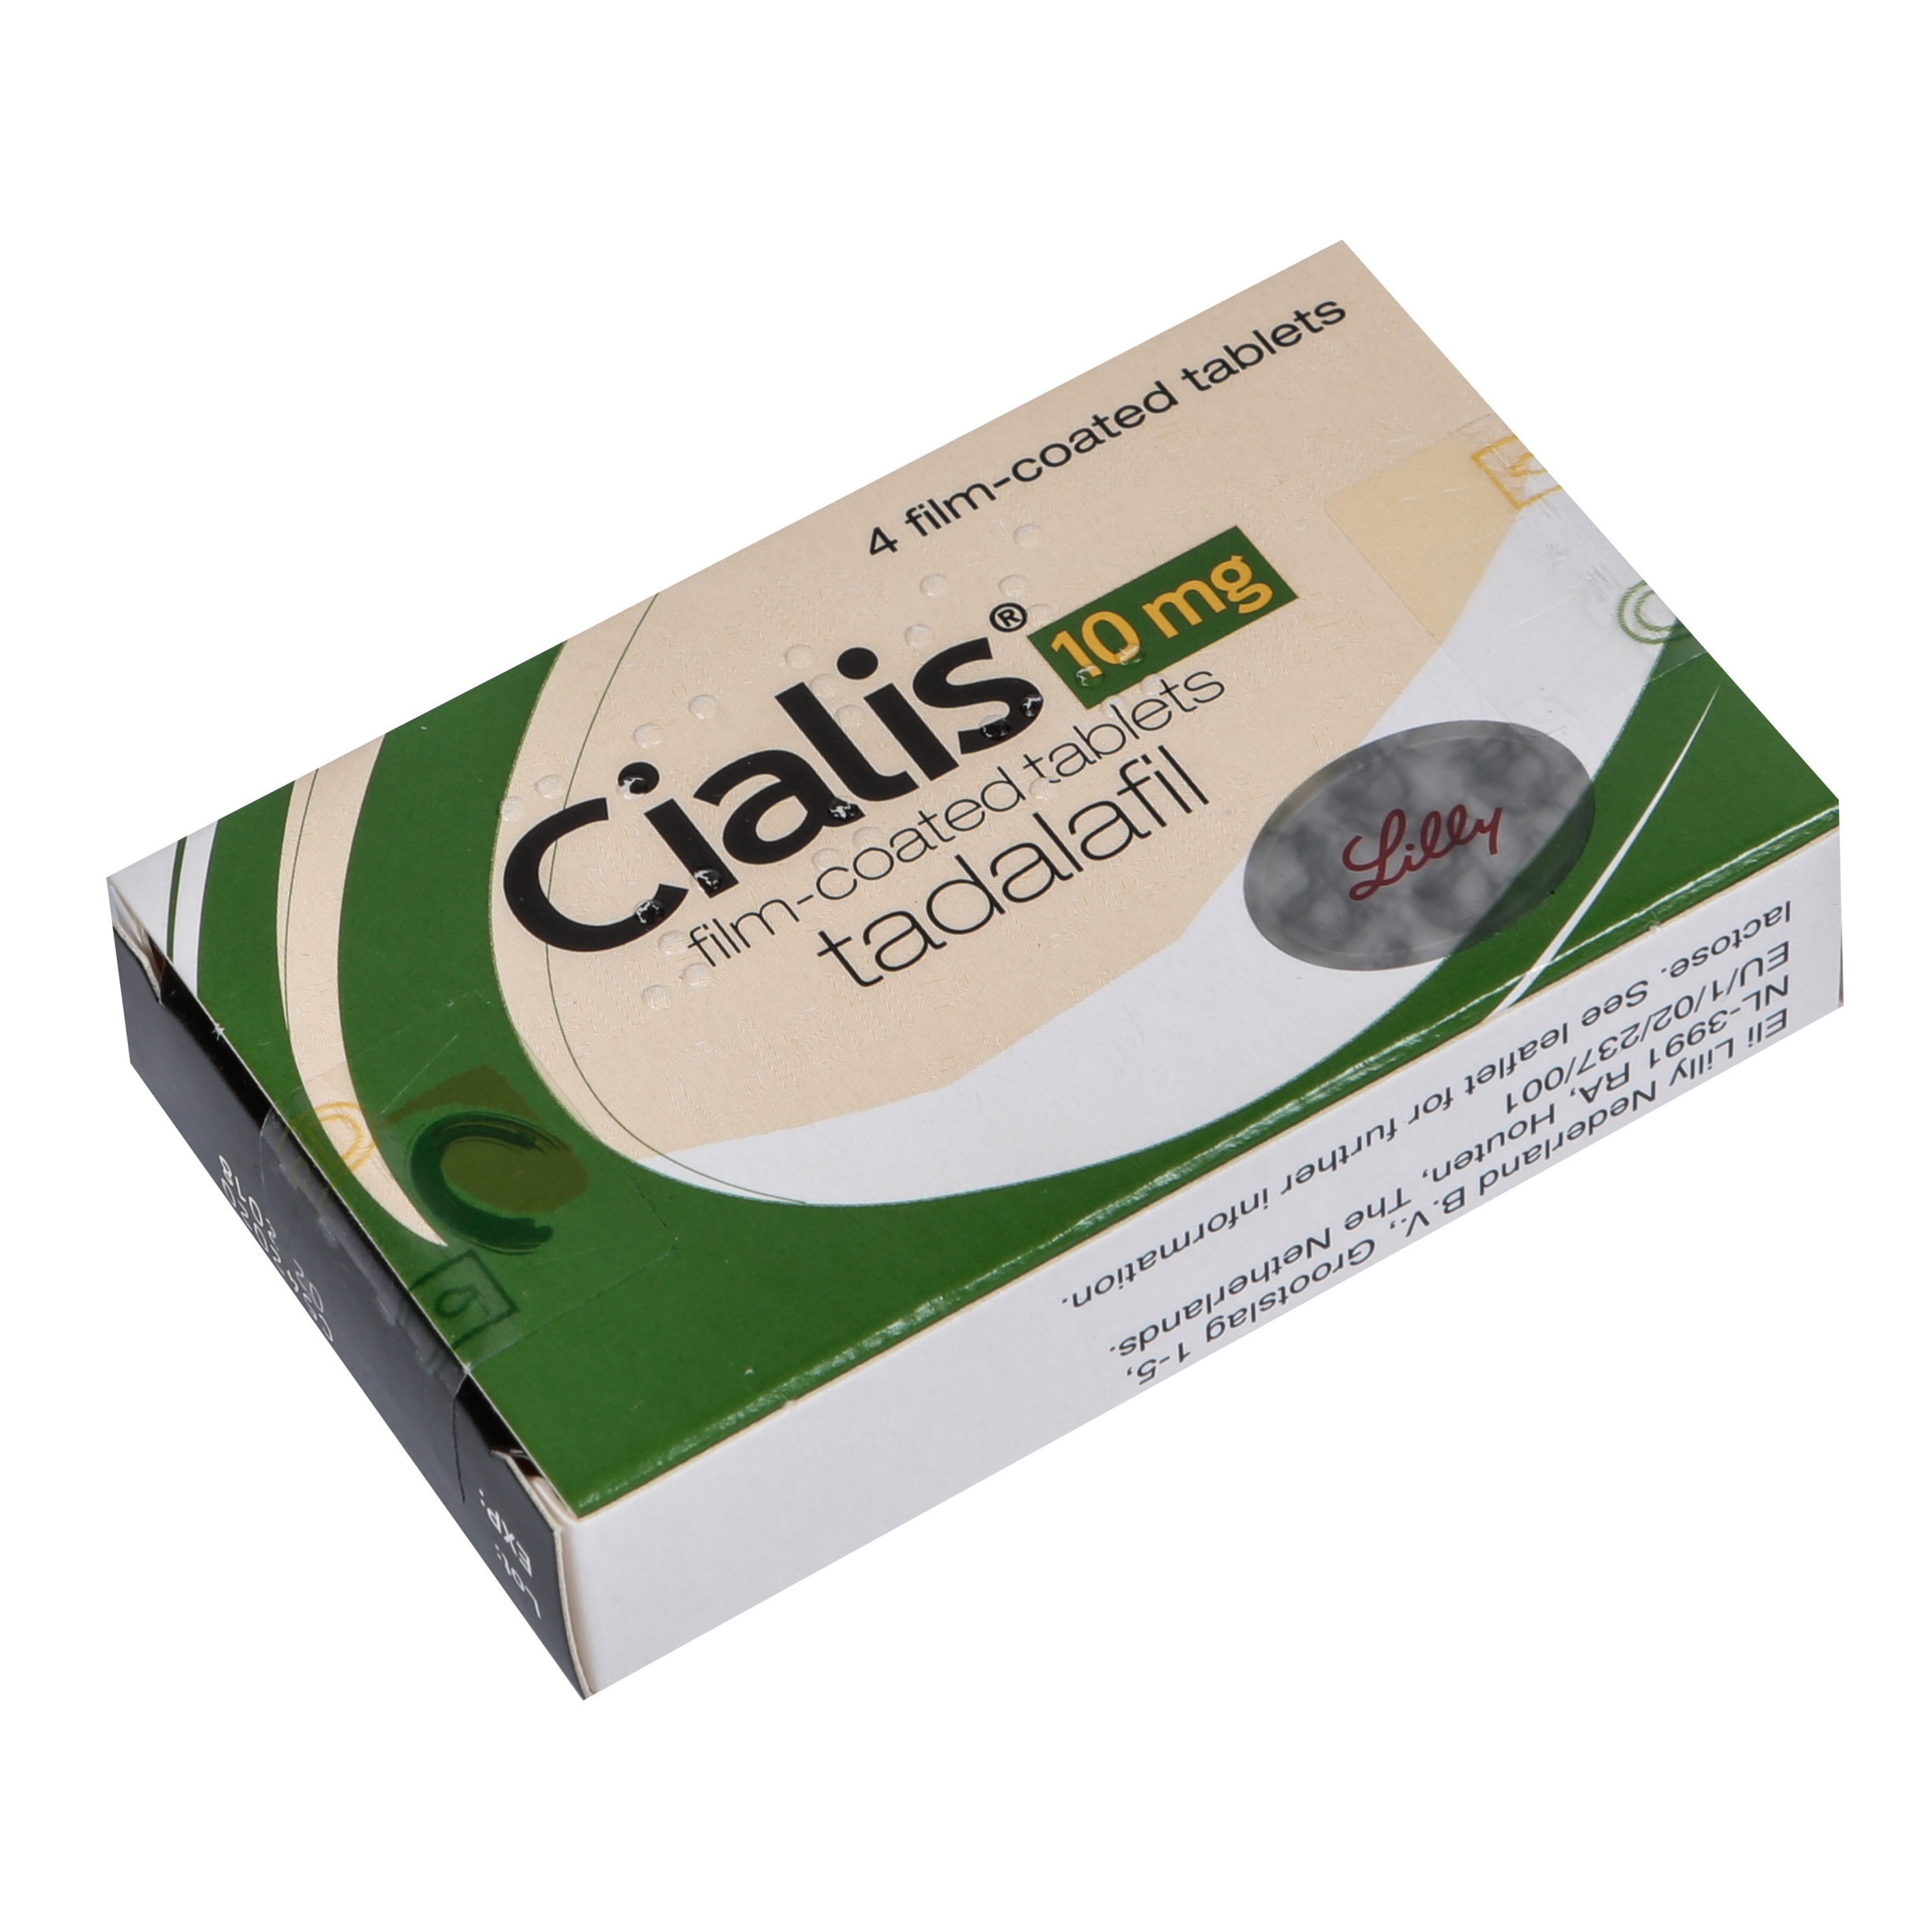 Reviews of Original Cialis 20mg 6 Tablets Card Made in USA